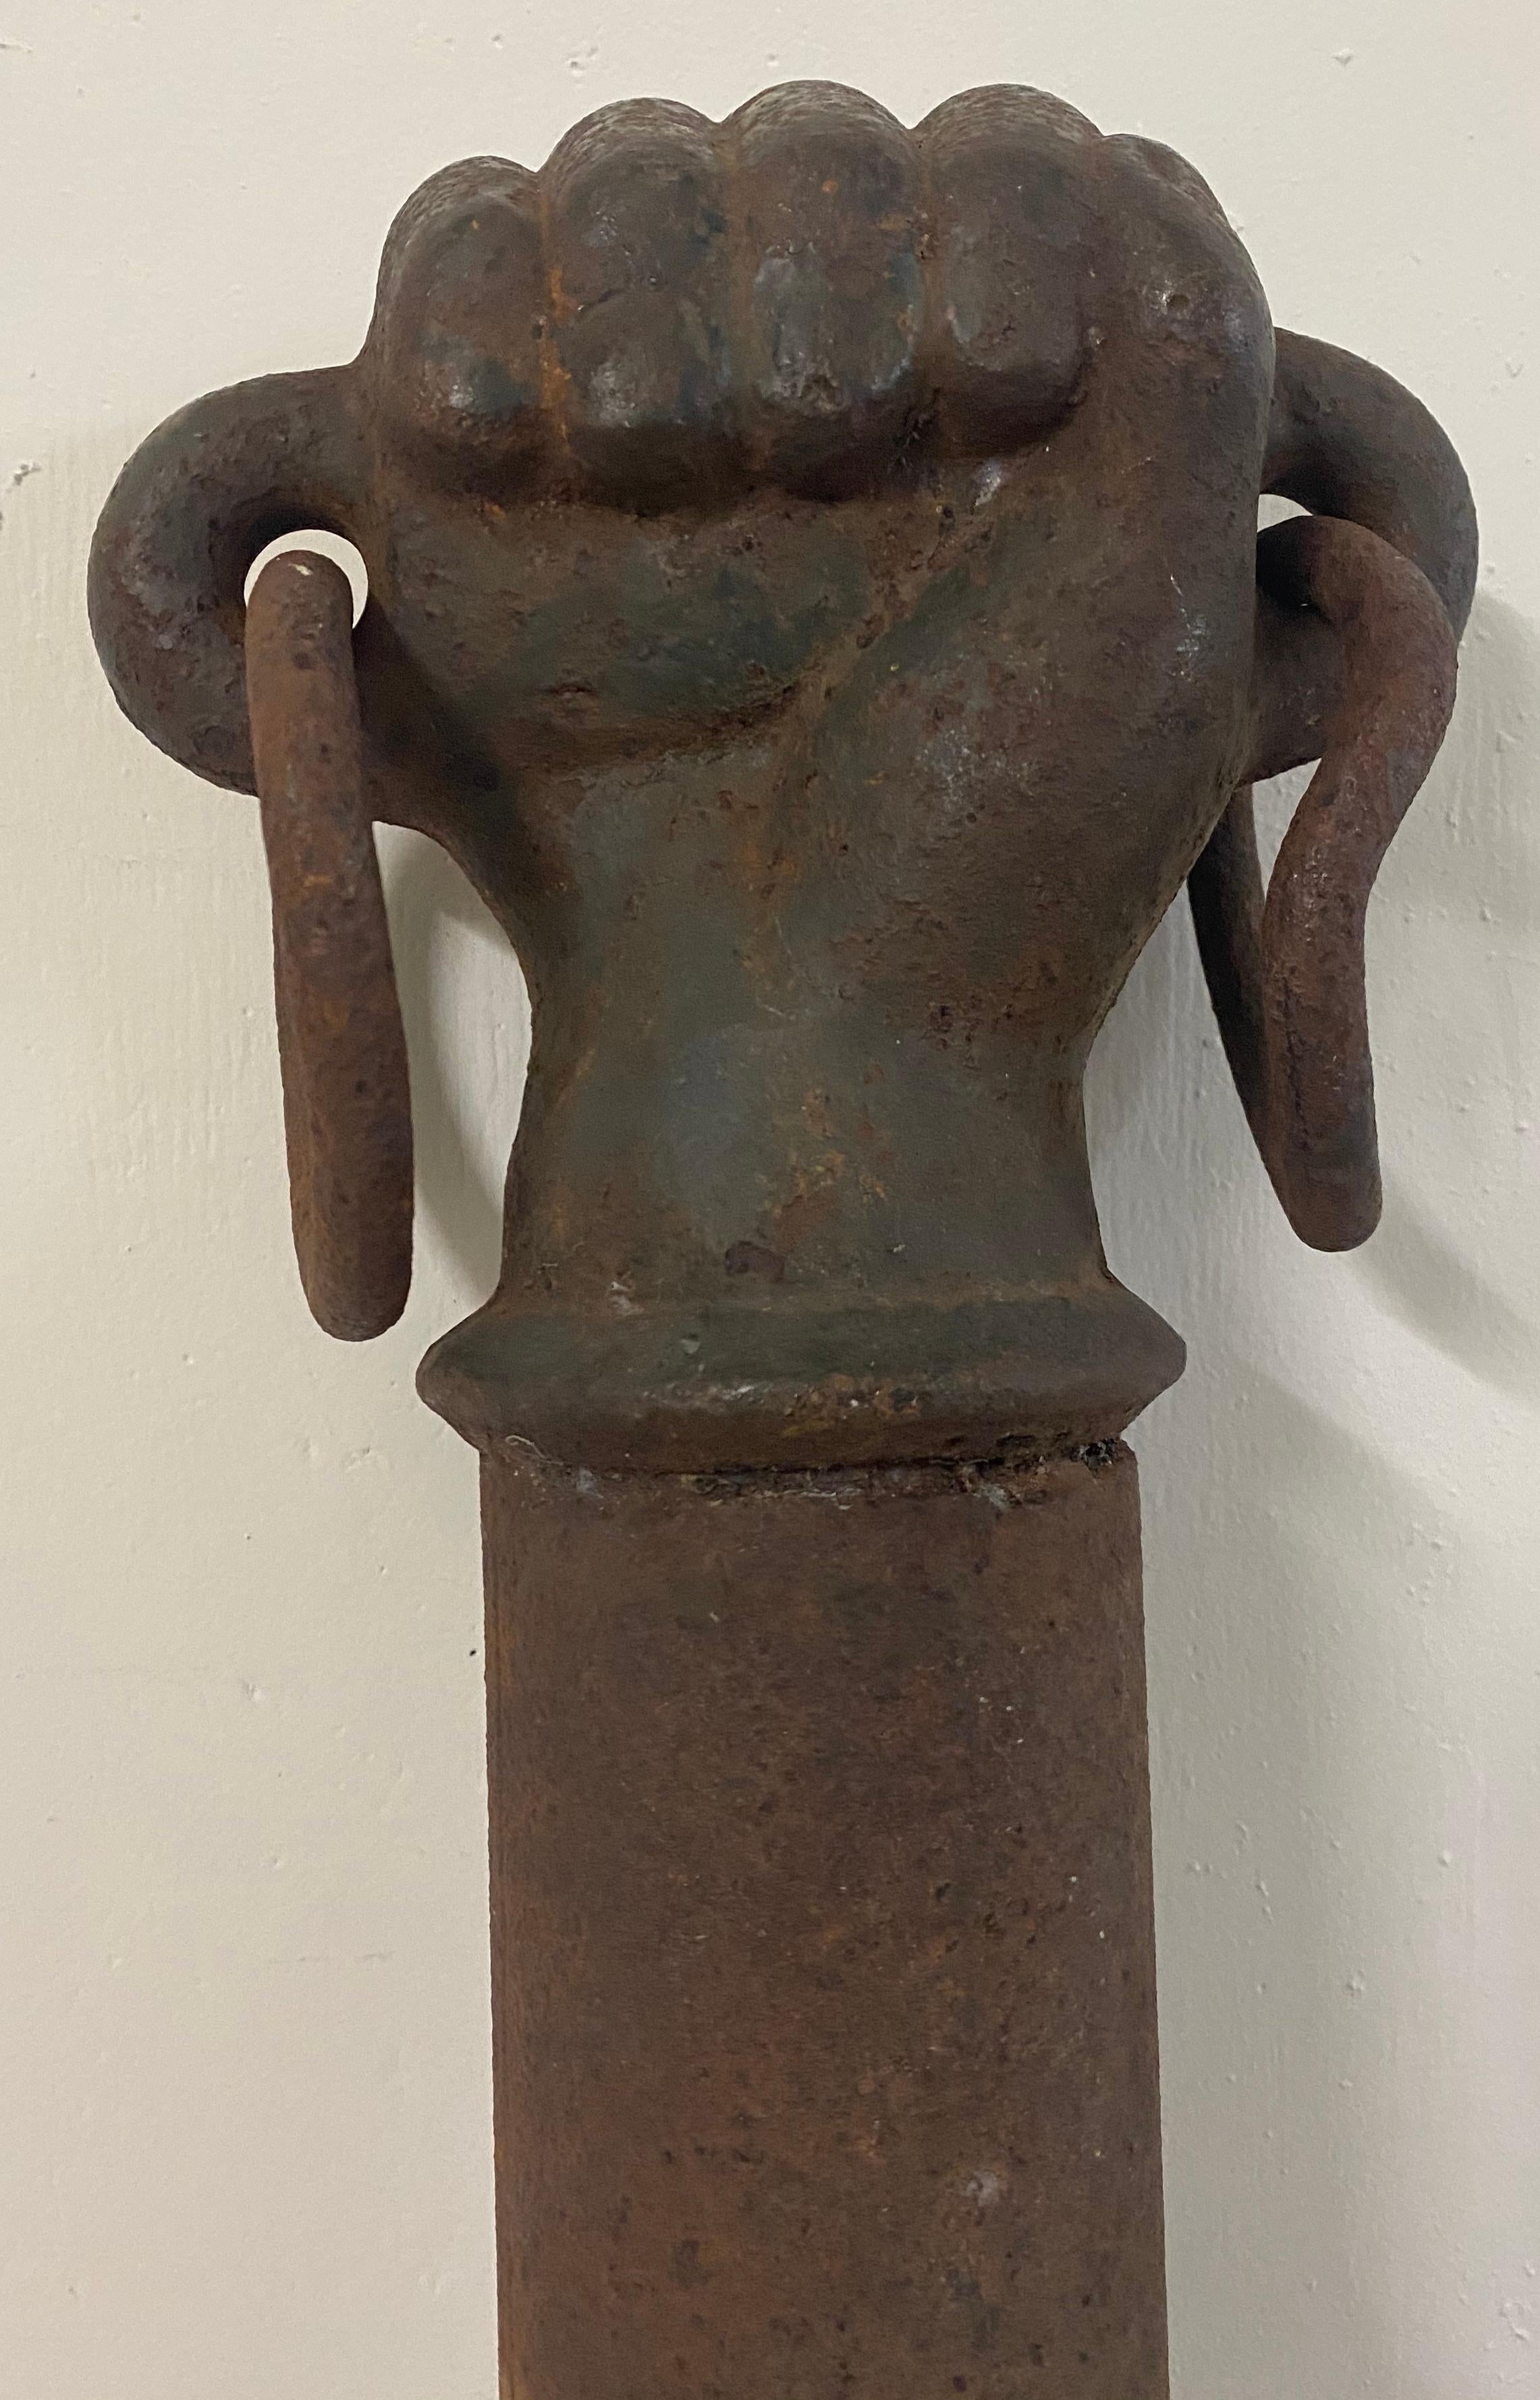 19th century cast iron clinched fist hitching post

Antique hitching post of a fist mounted on a tall iron post

Fist dimensions 7